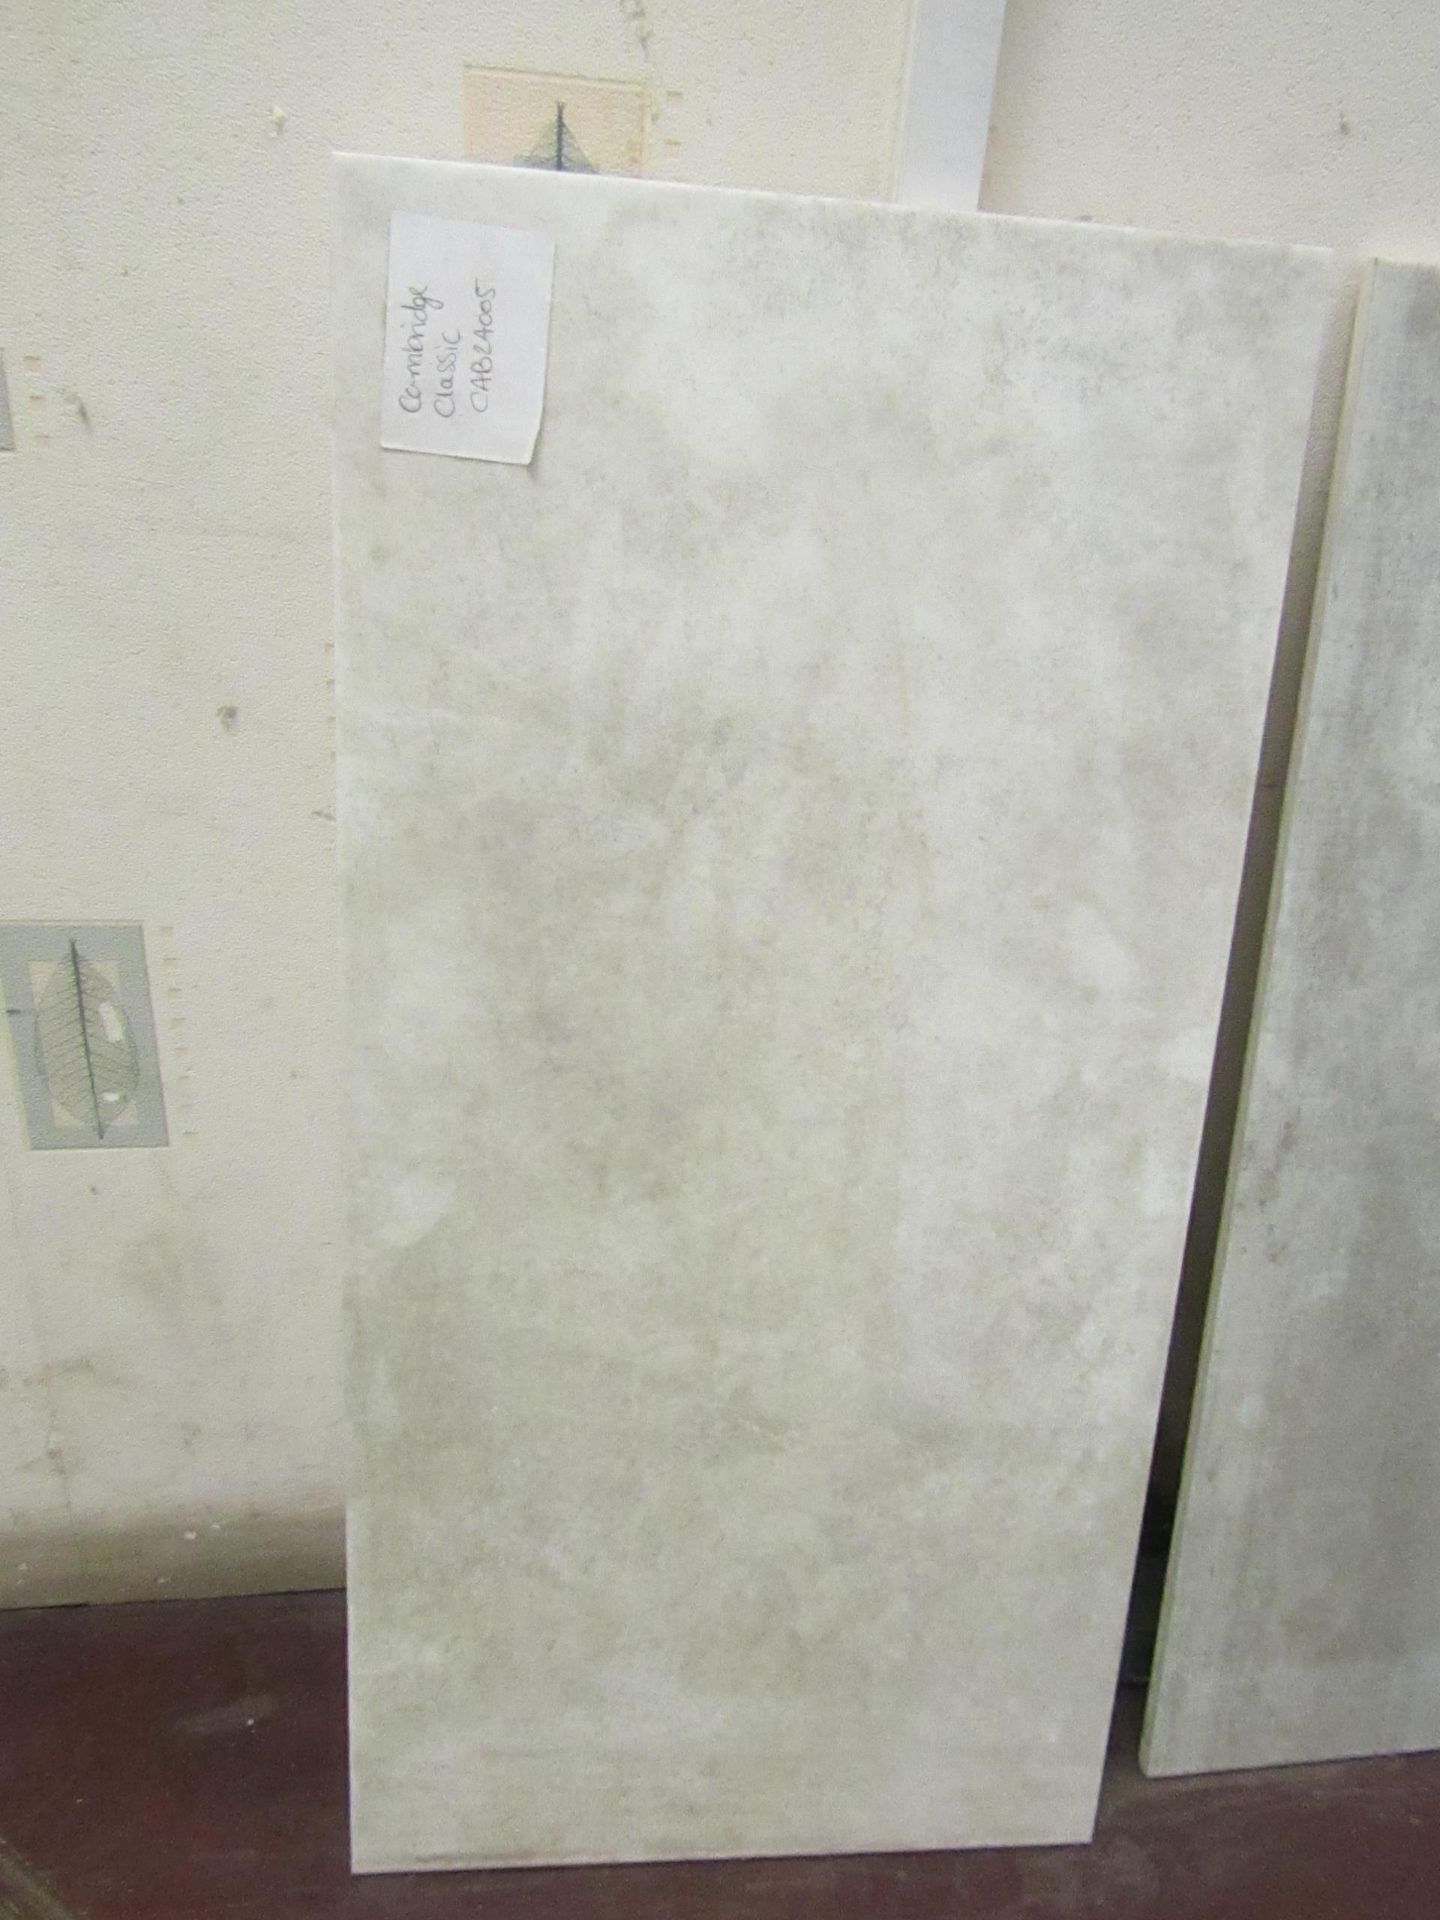 10x Packs of 5 Aslar White 300x600 wall and Floor Tiles By Johnsons, the RRP per pack is œ34.99